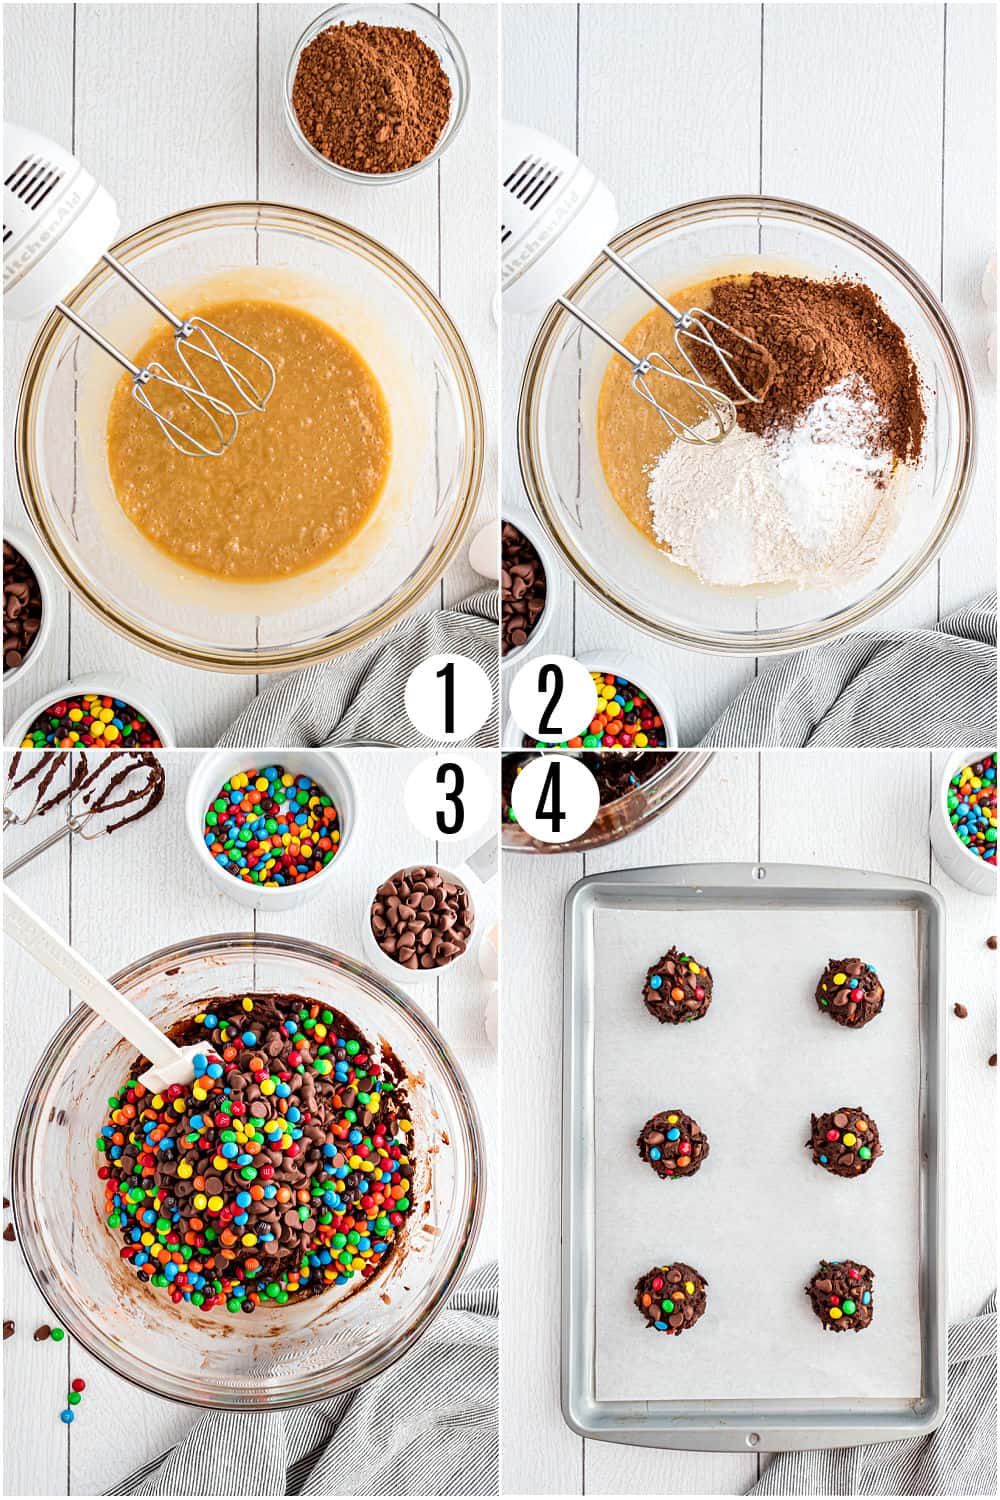 Step by step photos showing how to make chocolate M&M cookies.